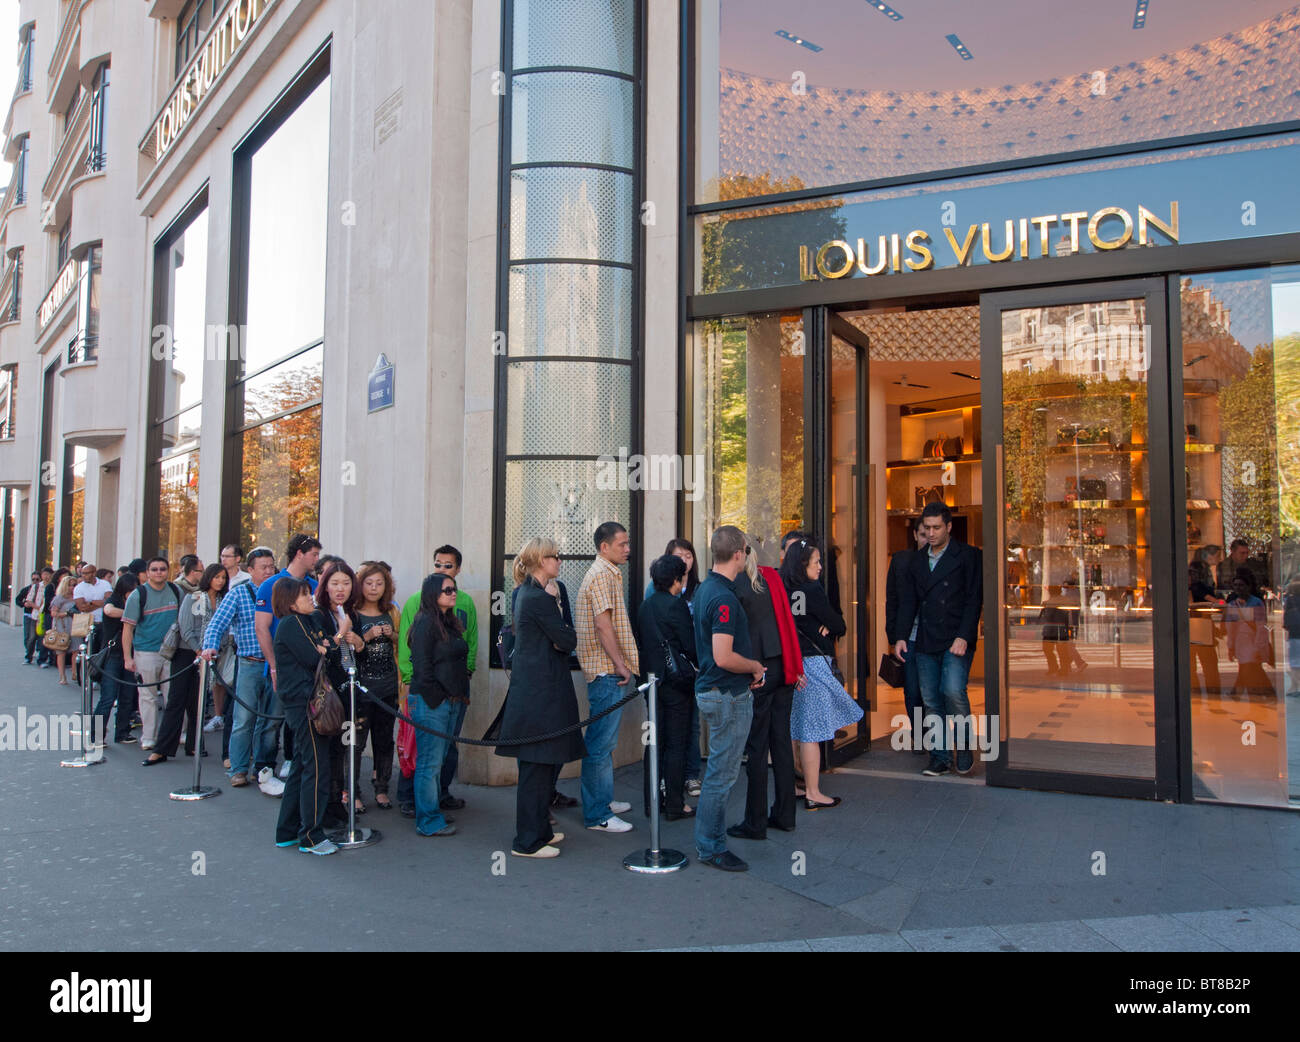 Queue of shoppers outside Louis Vuitton store on Champs Elysees in Stock Photo: 32146430 - Alamy